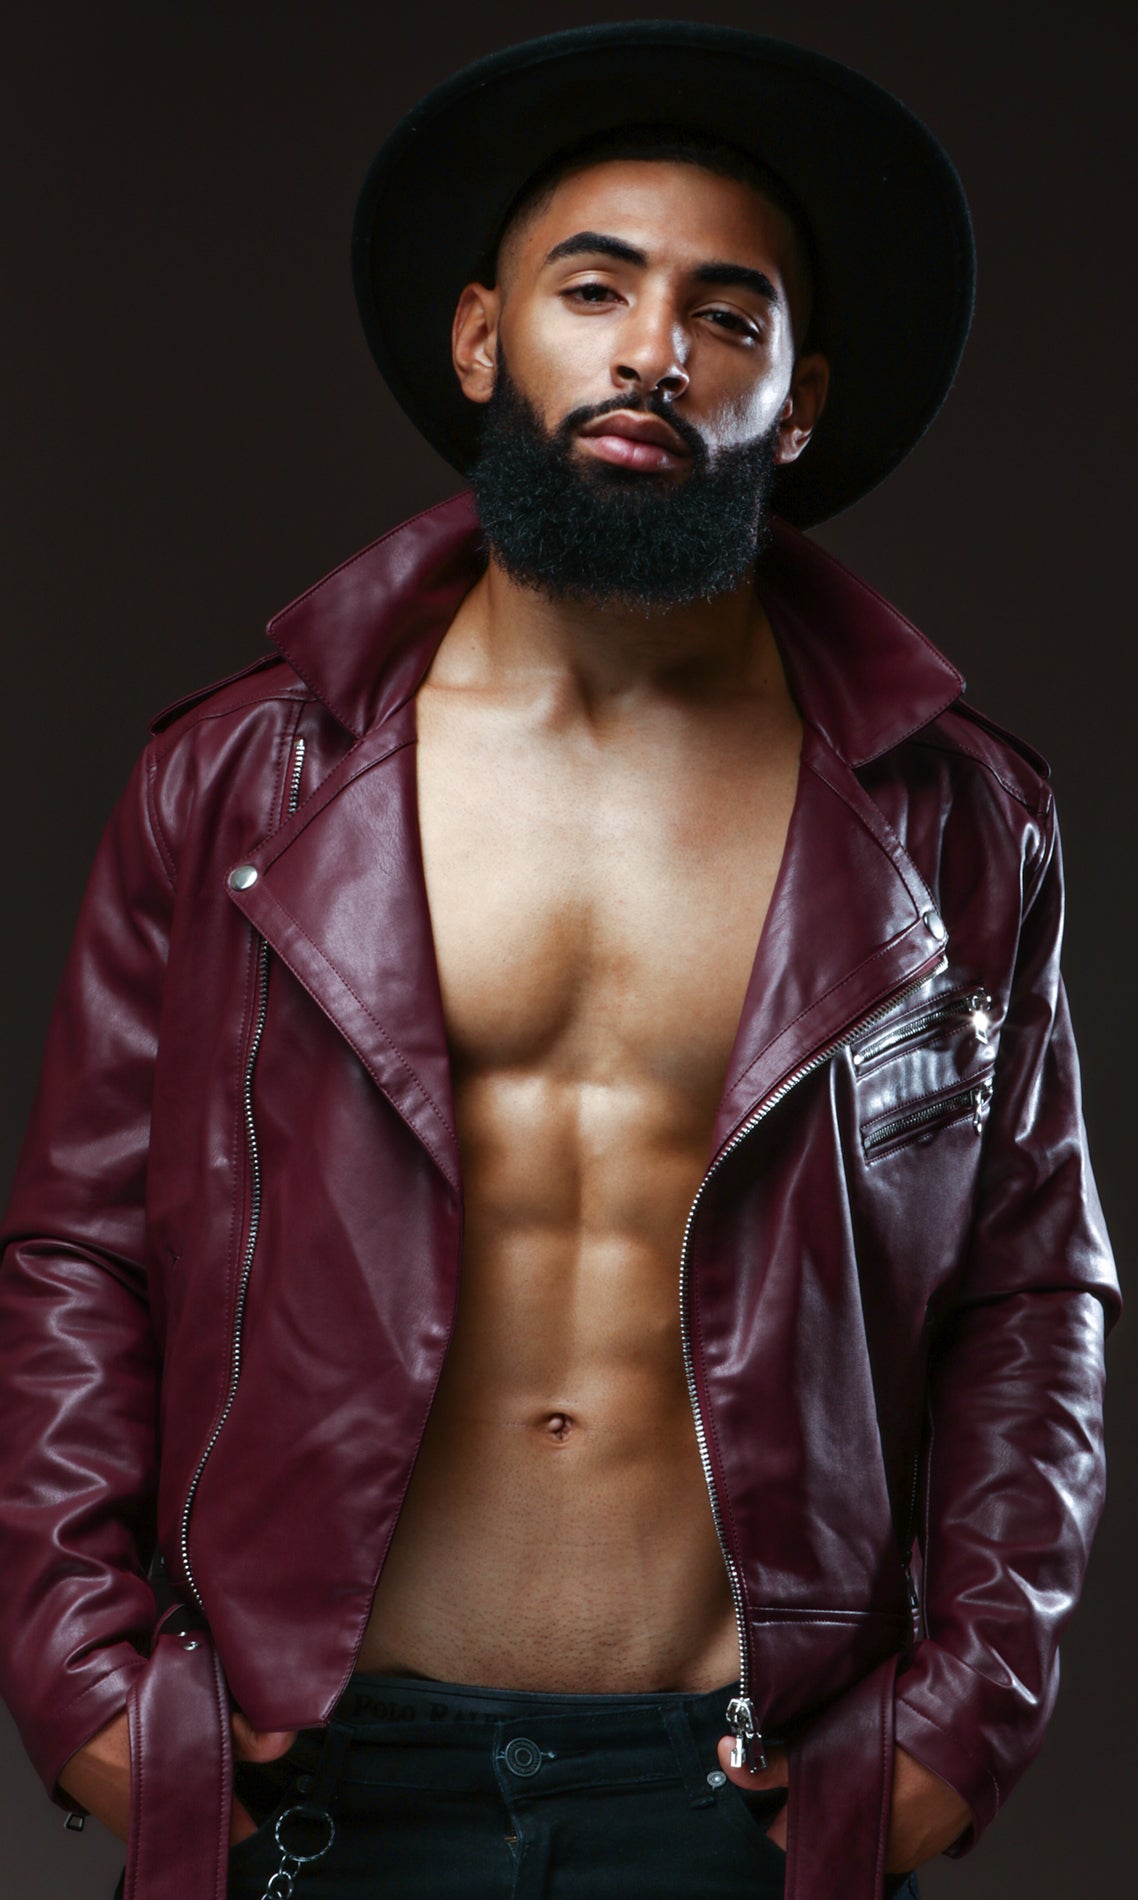 #MCM: Bearded Model Justus Pickett Will Make You Swoon
